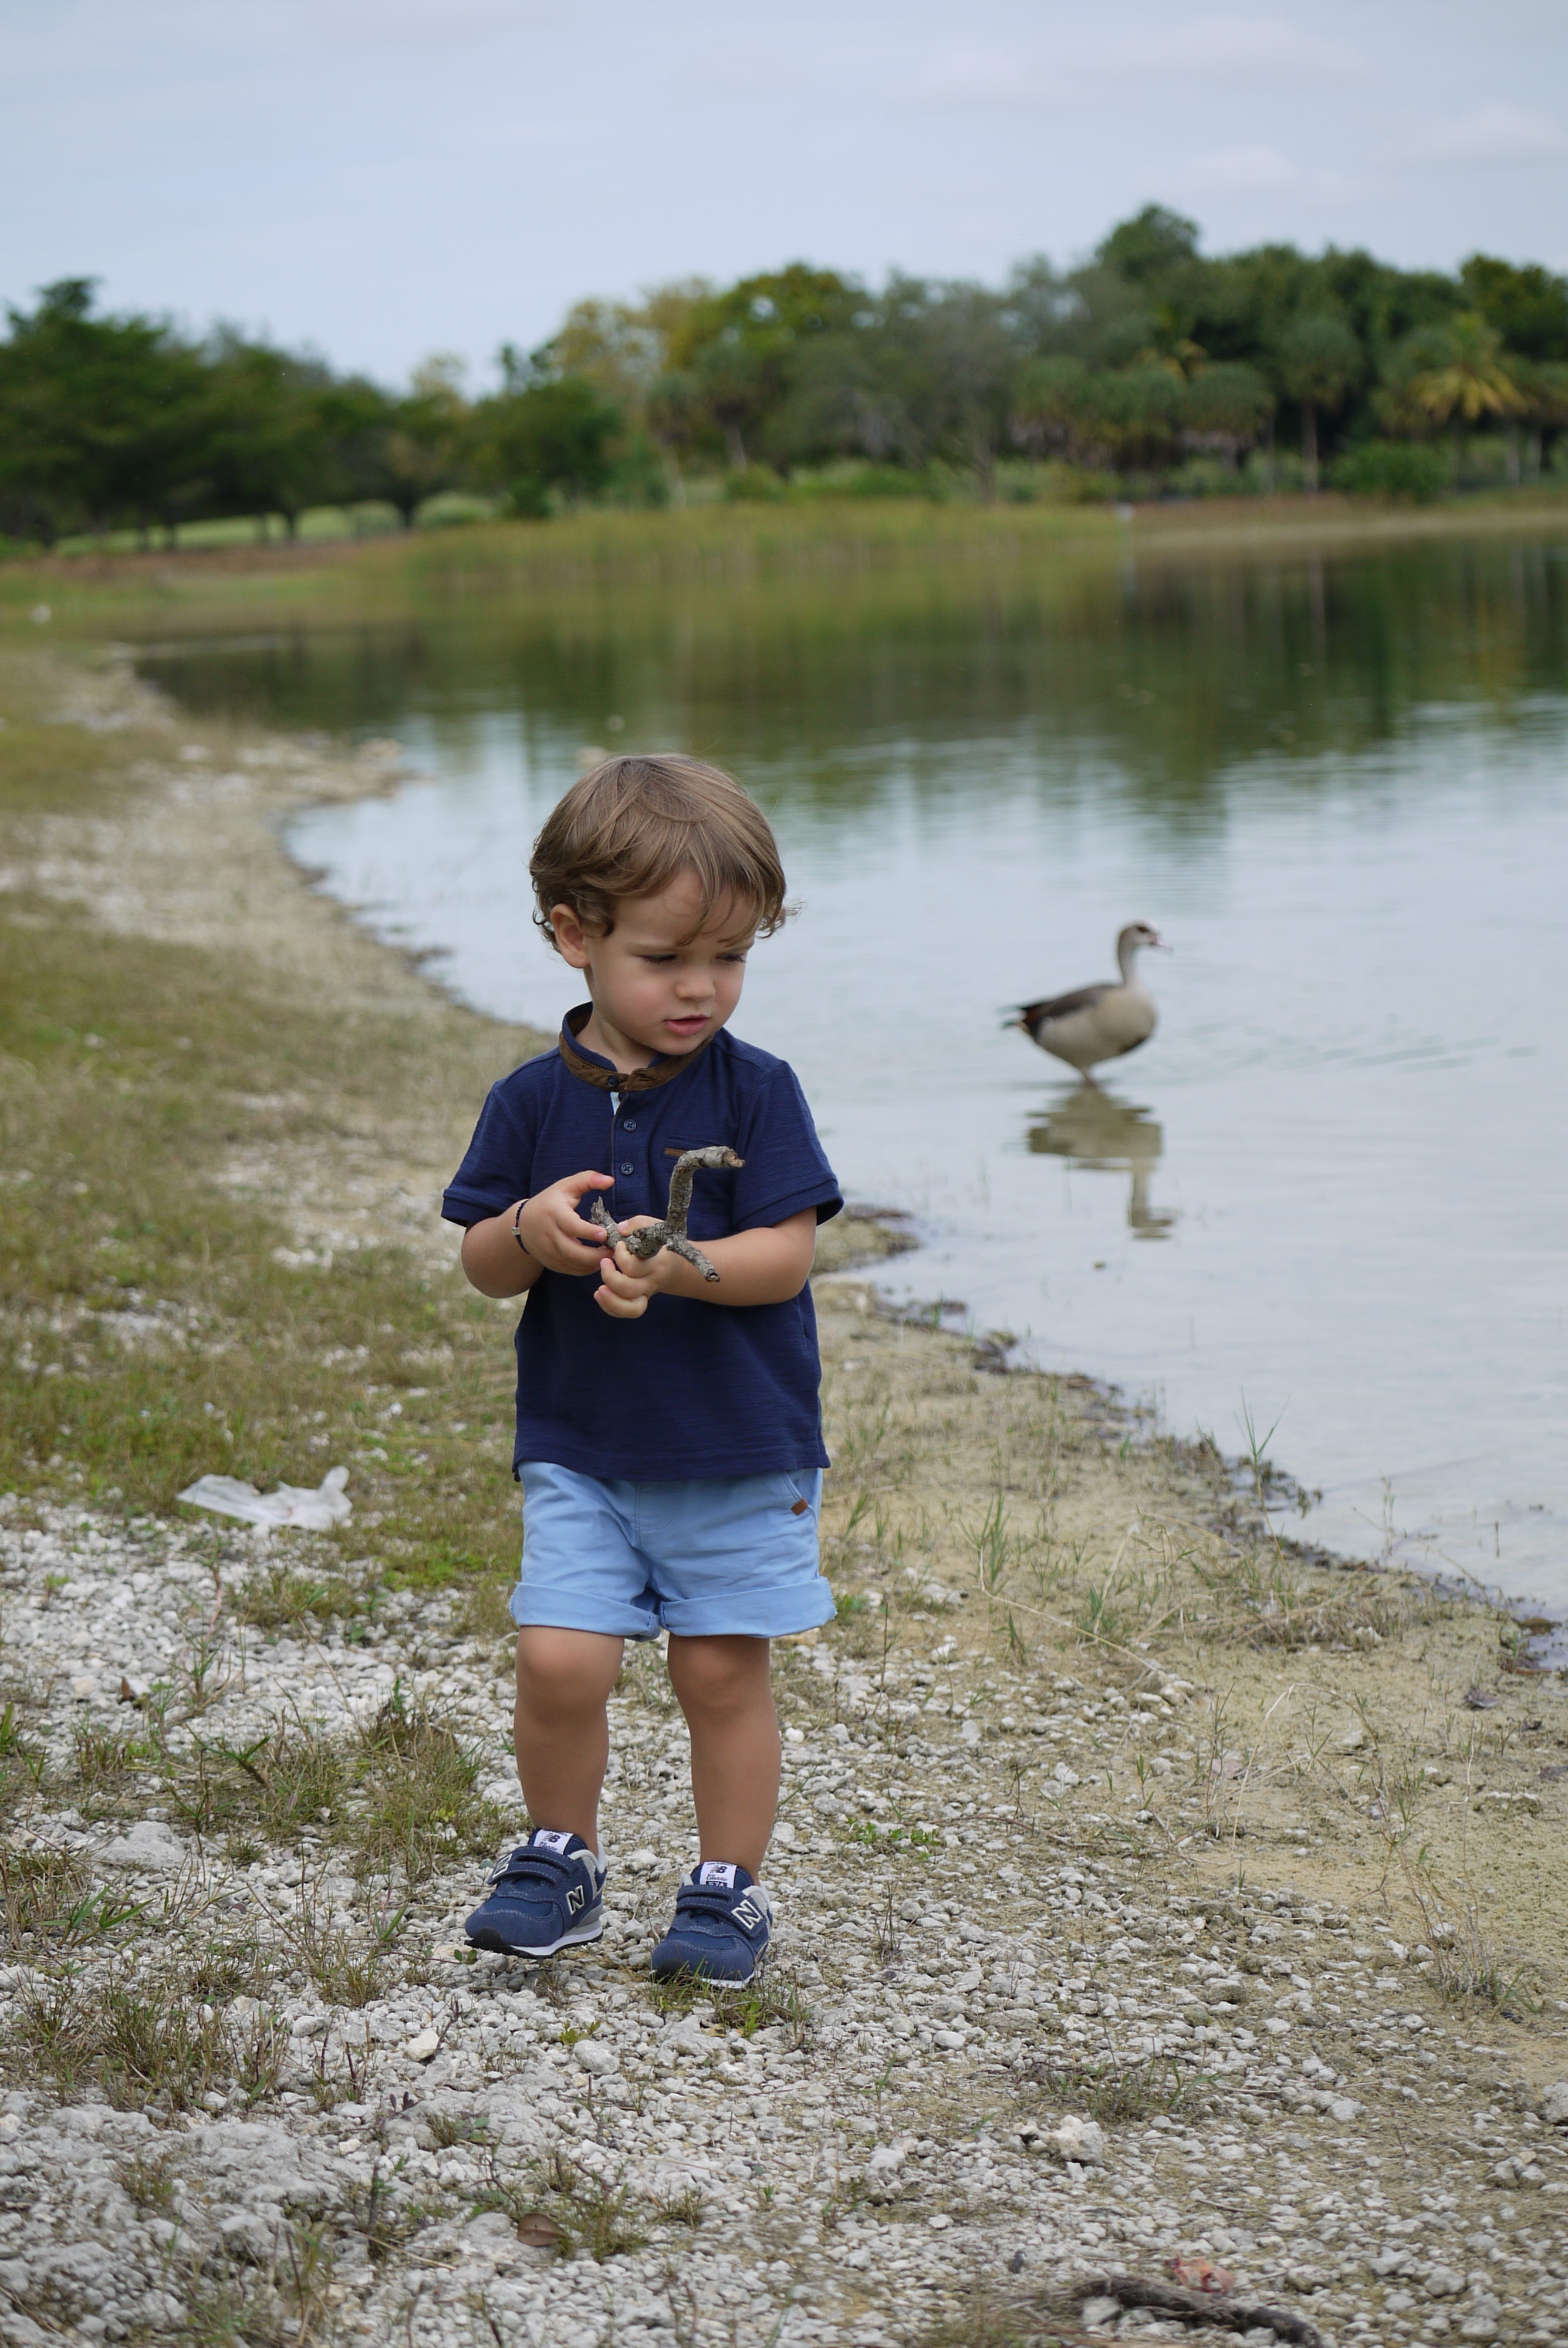 Alba Marina Otero fashion blogger from Mylovelypeople blog shares with you some pics of her son. He is wearing a blue shorts with blue t-shirt and new balance sneakers.